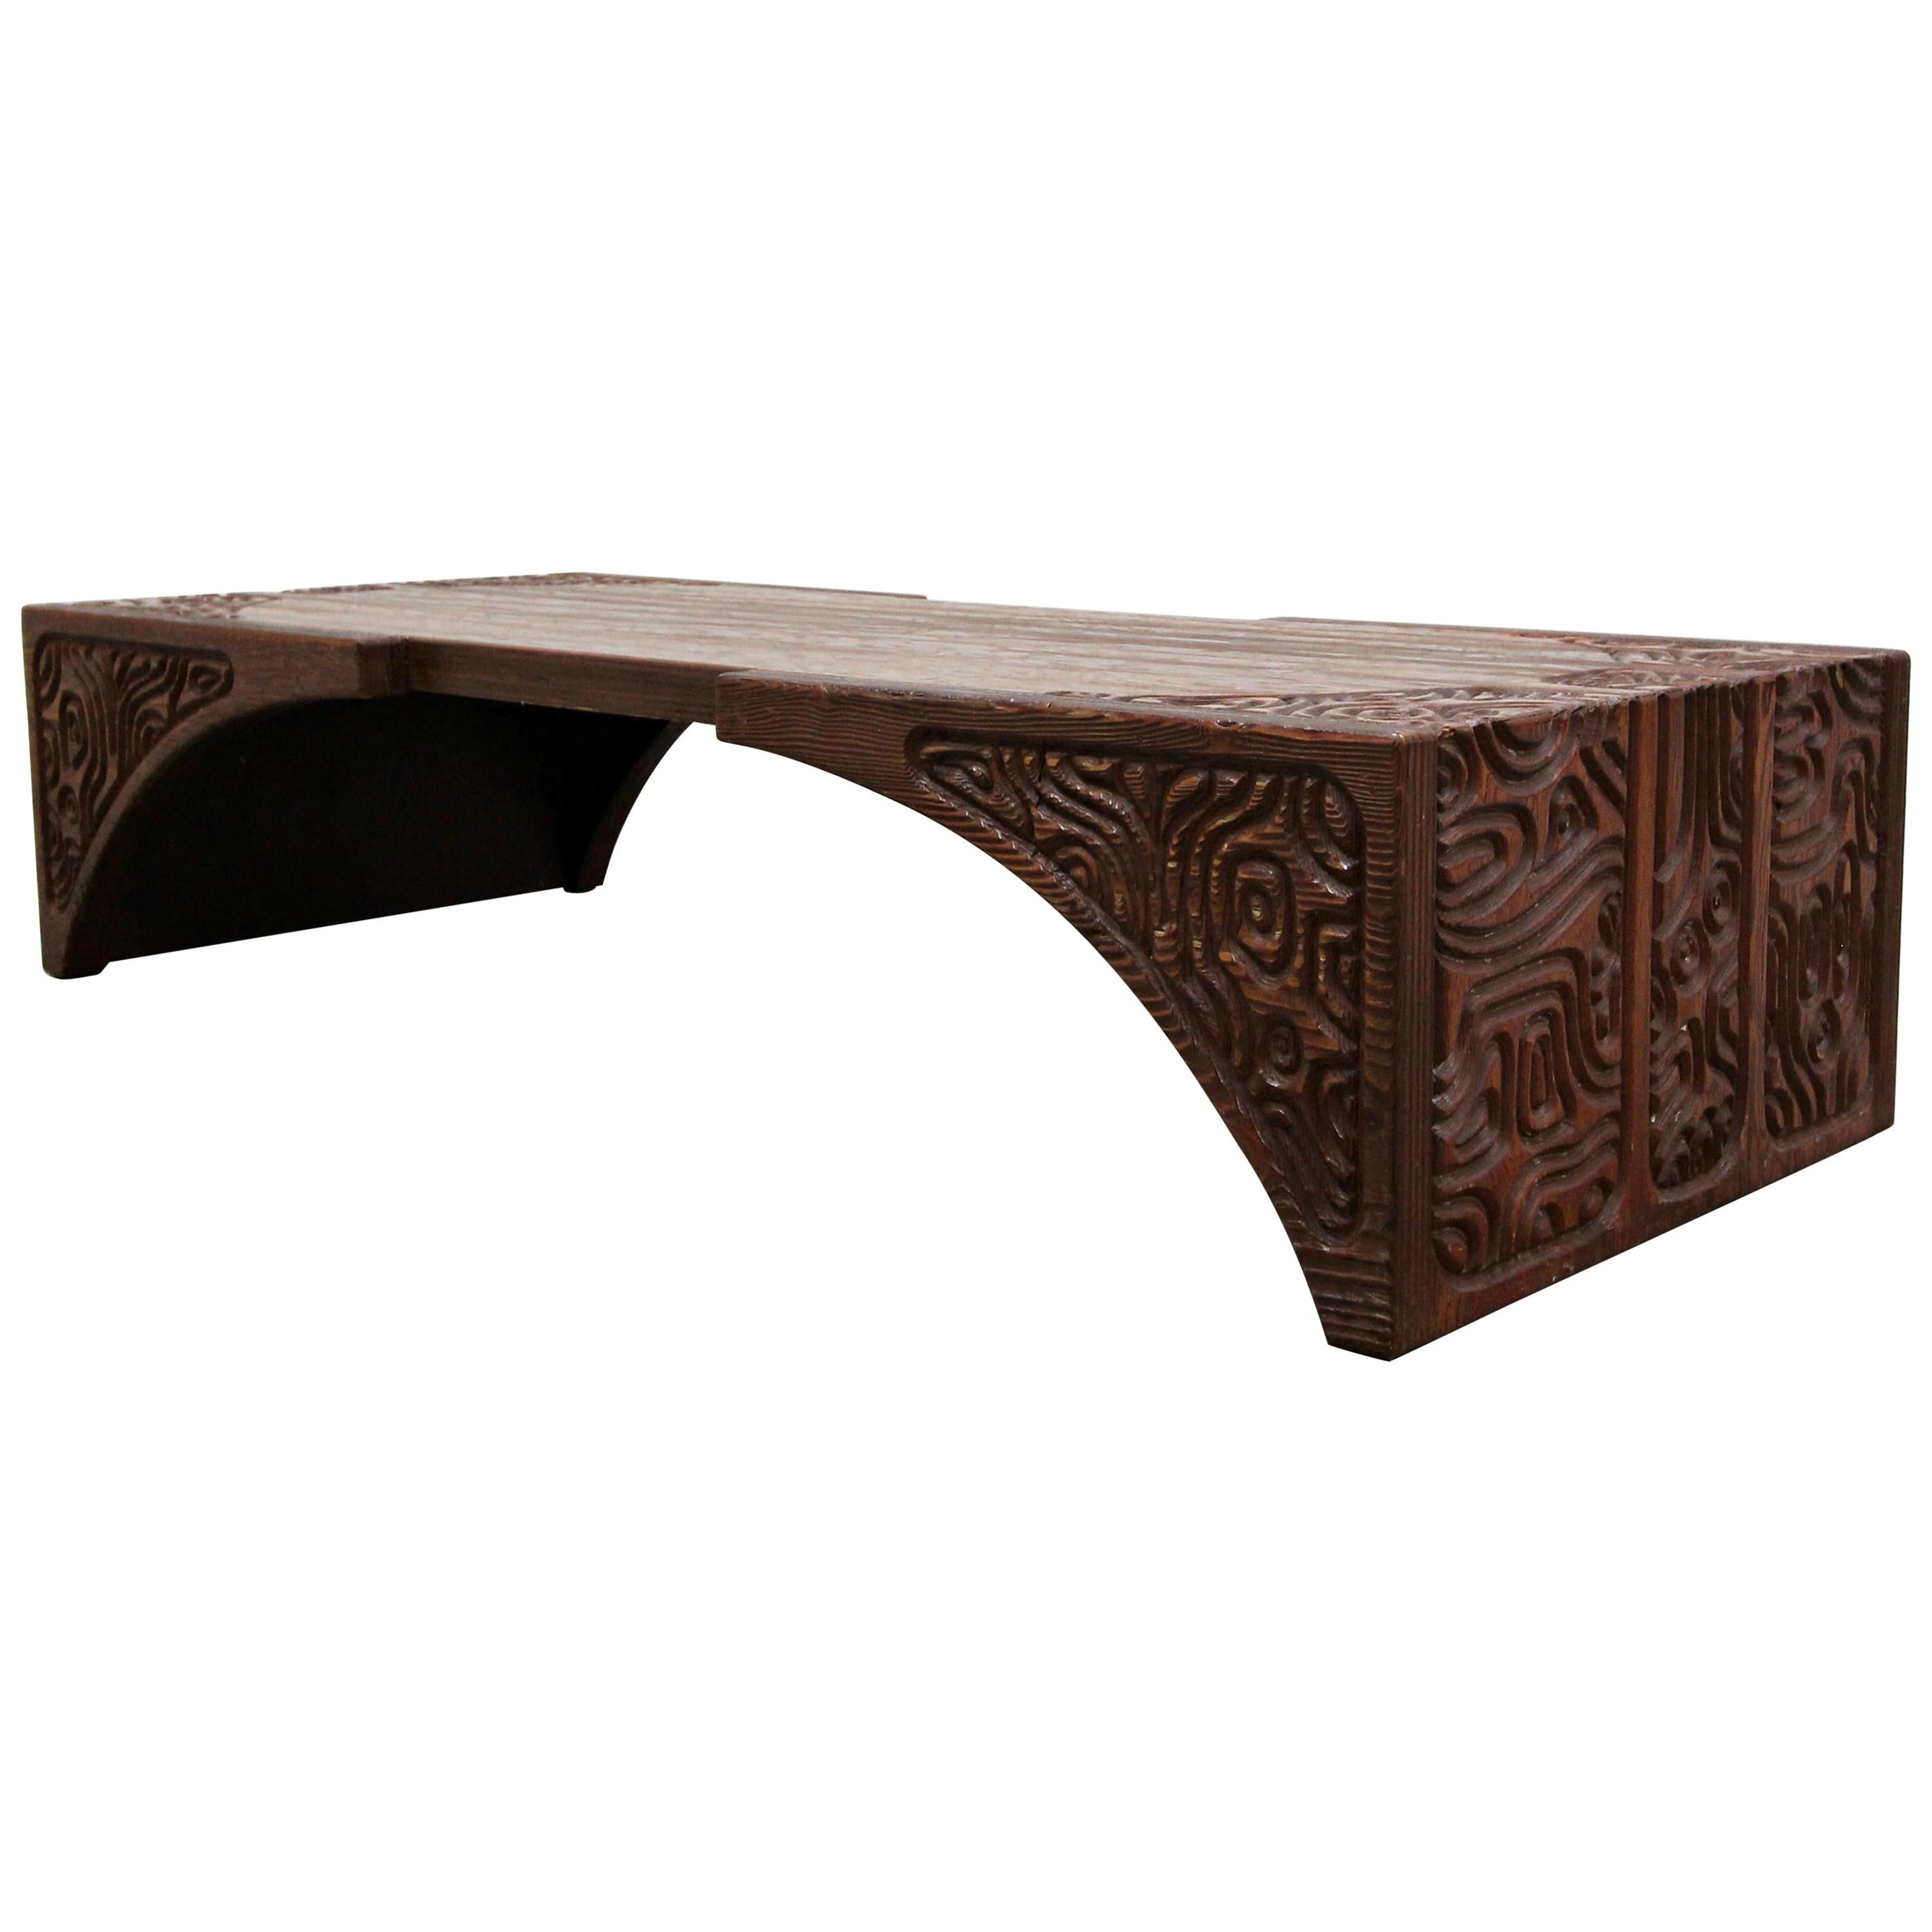 Midcentury Panelcarve Style Carved Wood Coffee Table by Sherrill Broudy